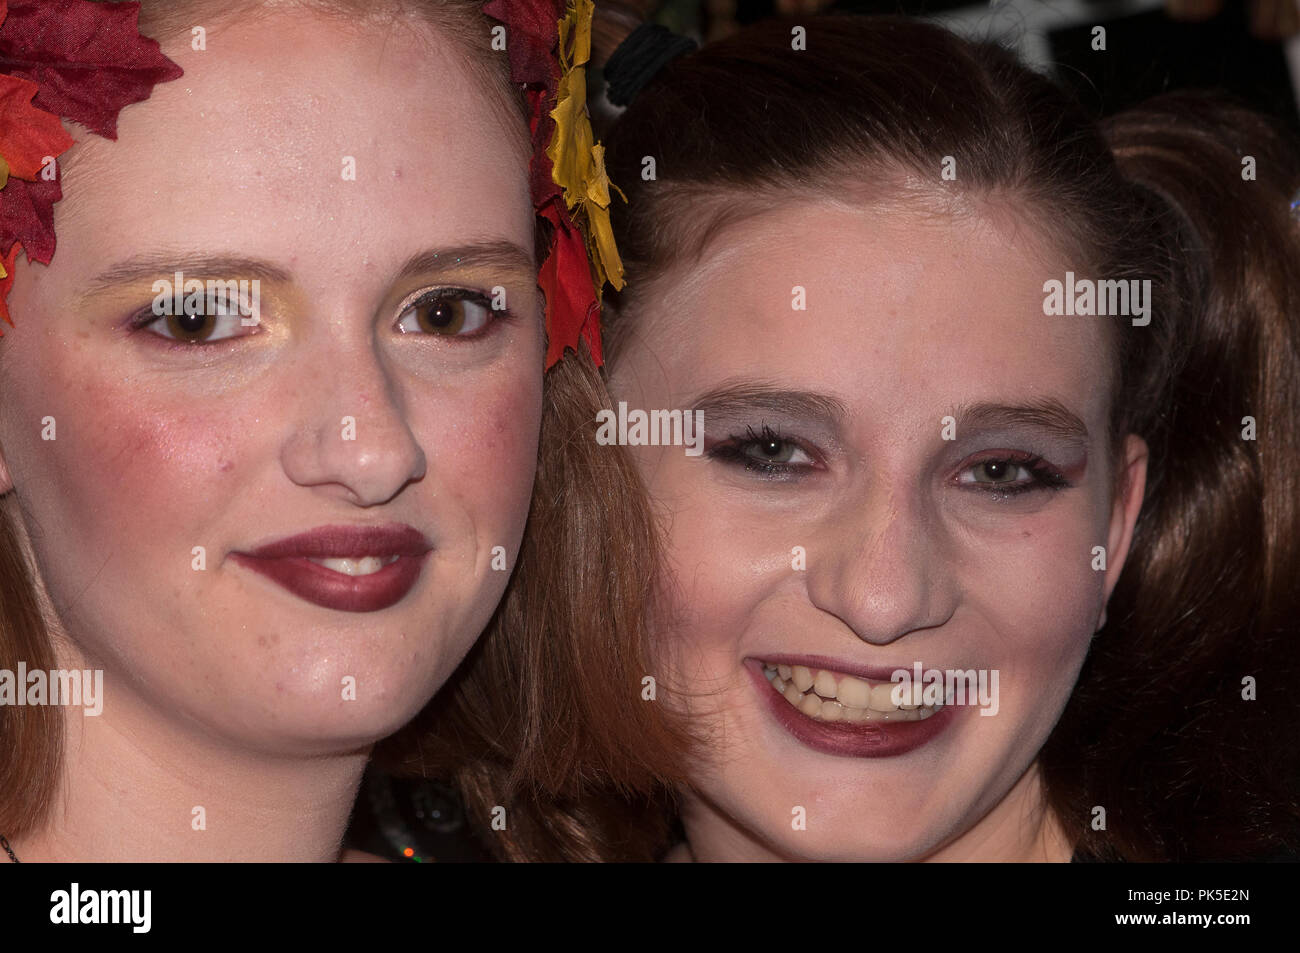 Two teen girls in makeup and costume Stock Photo